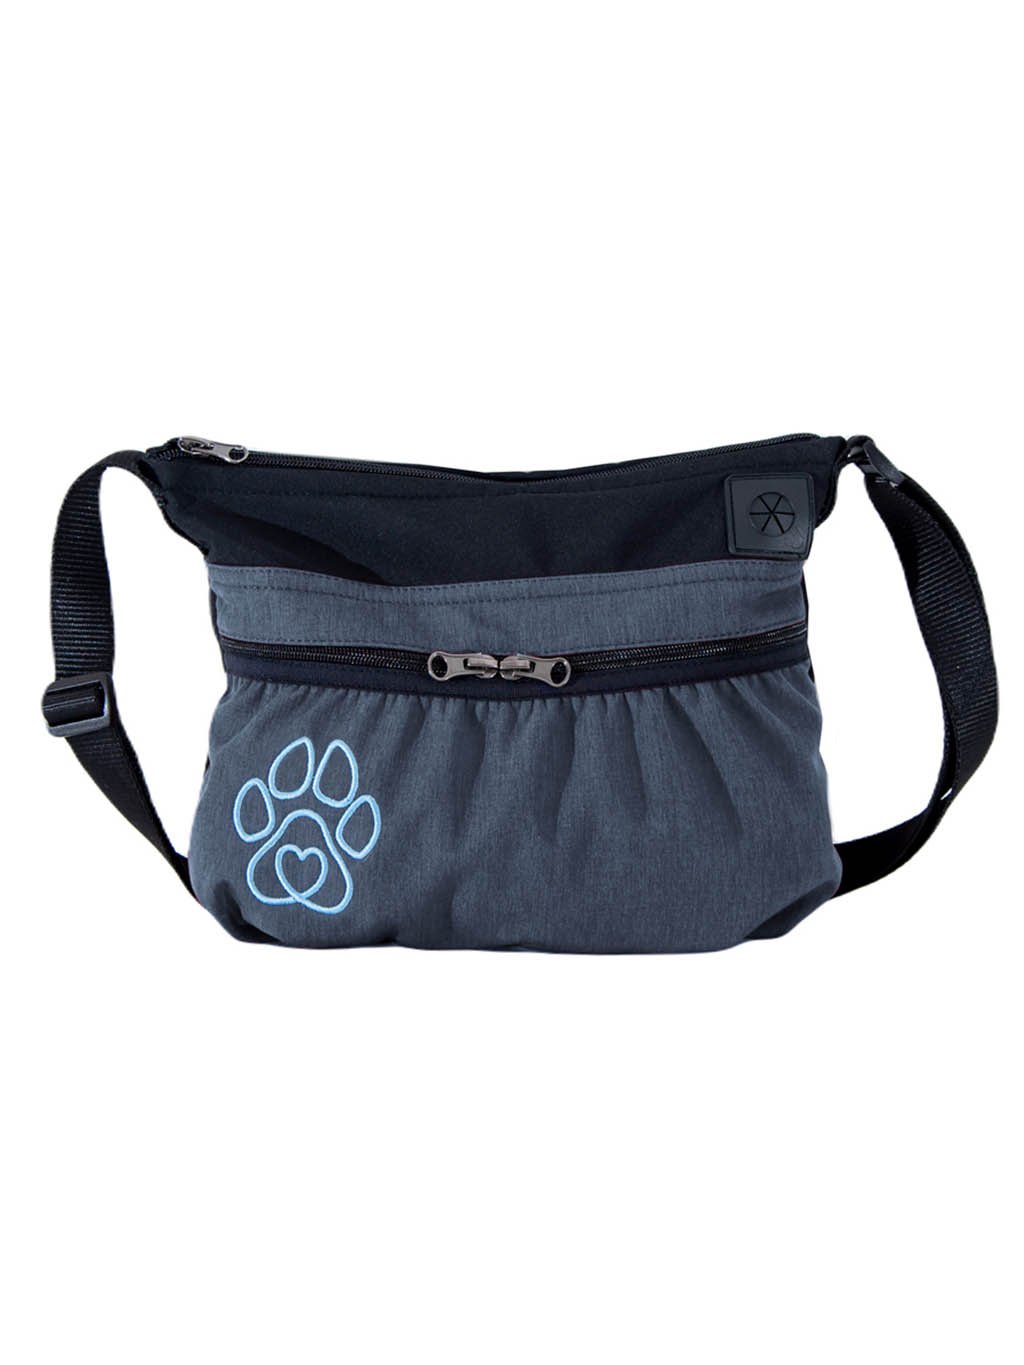 Training bag small ANTRACITE with paw 4dox